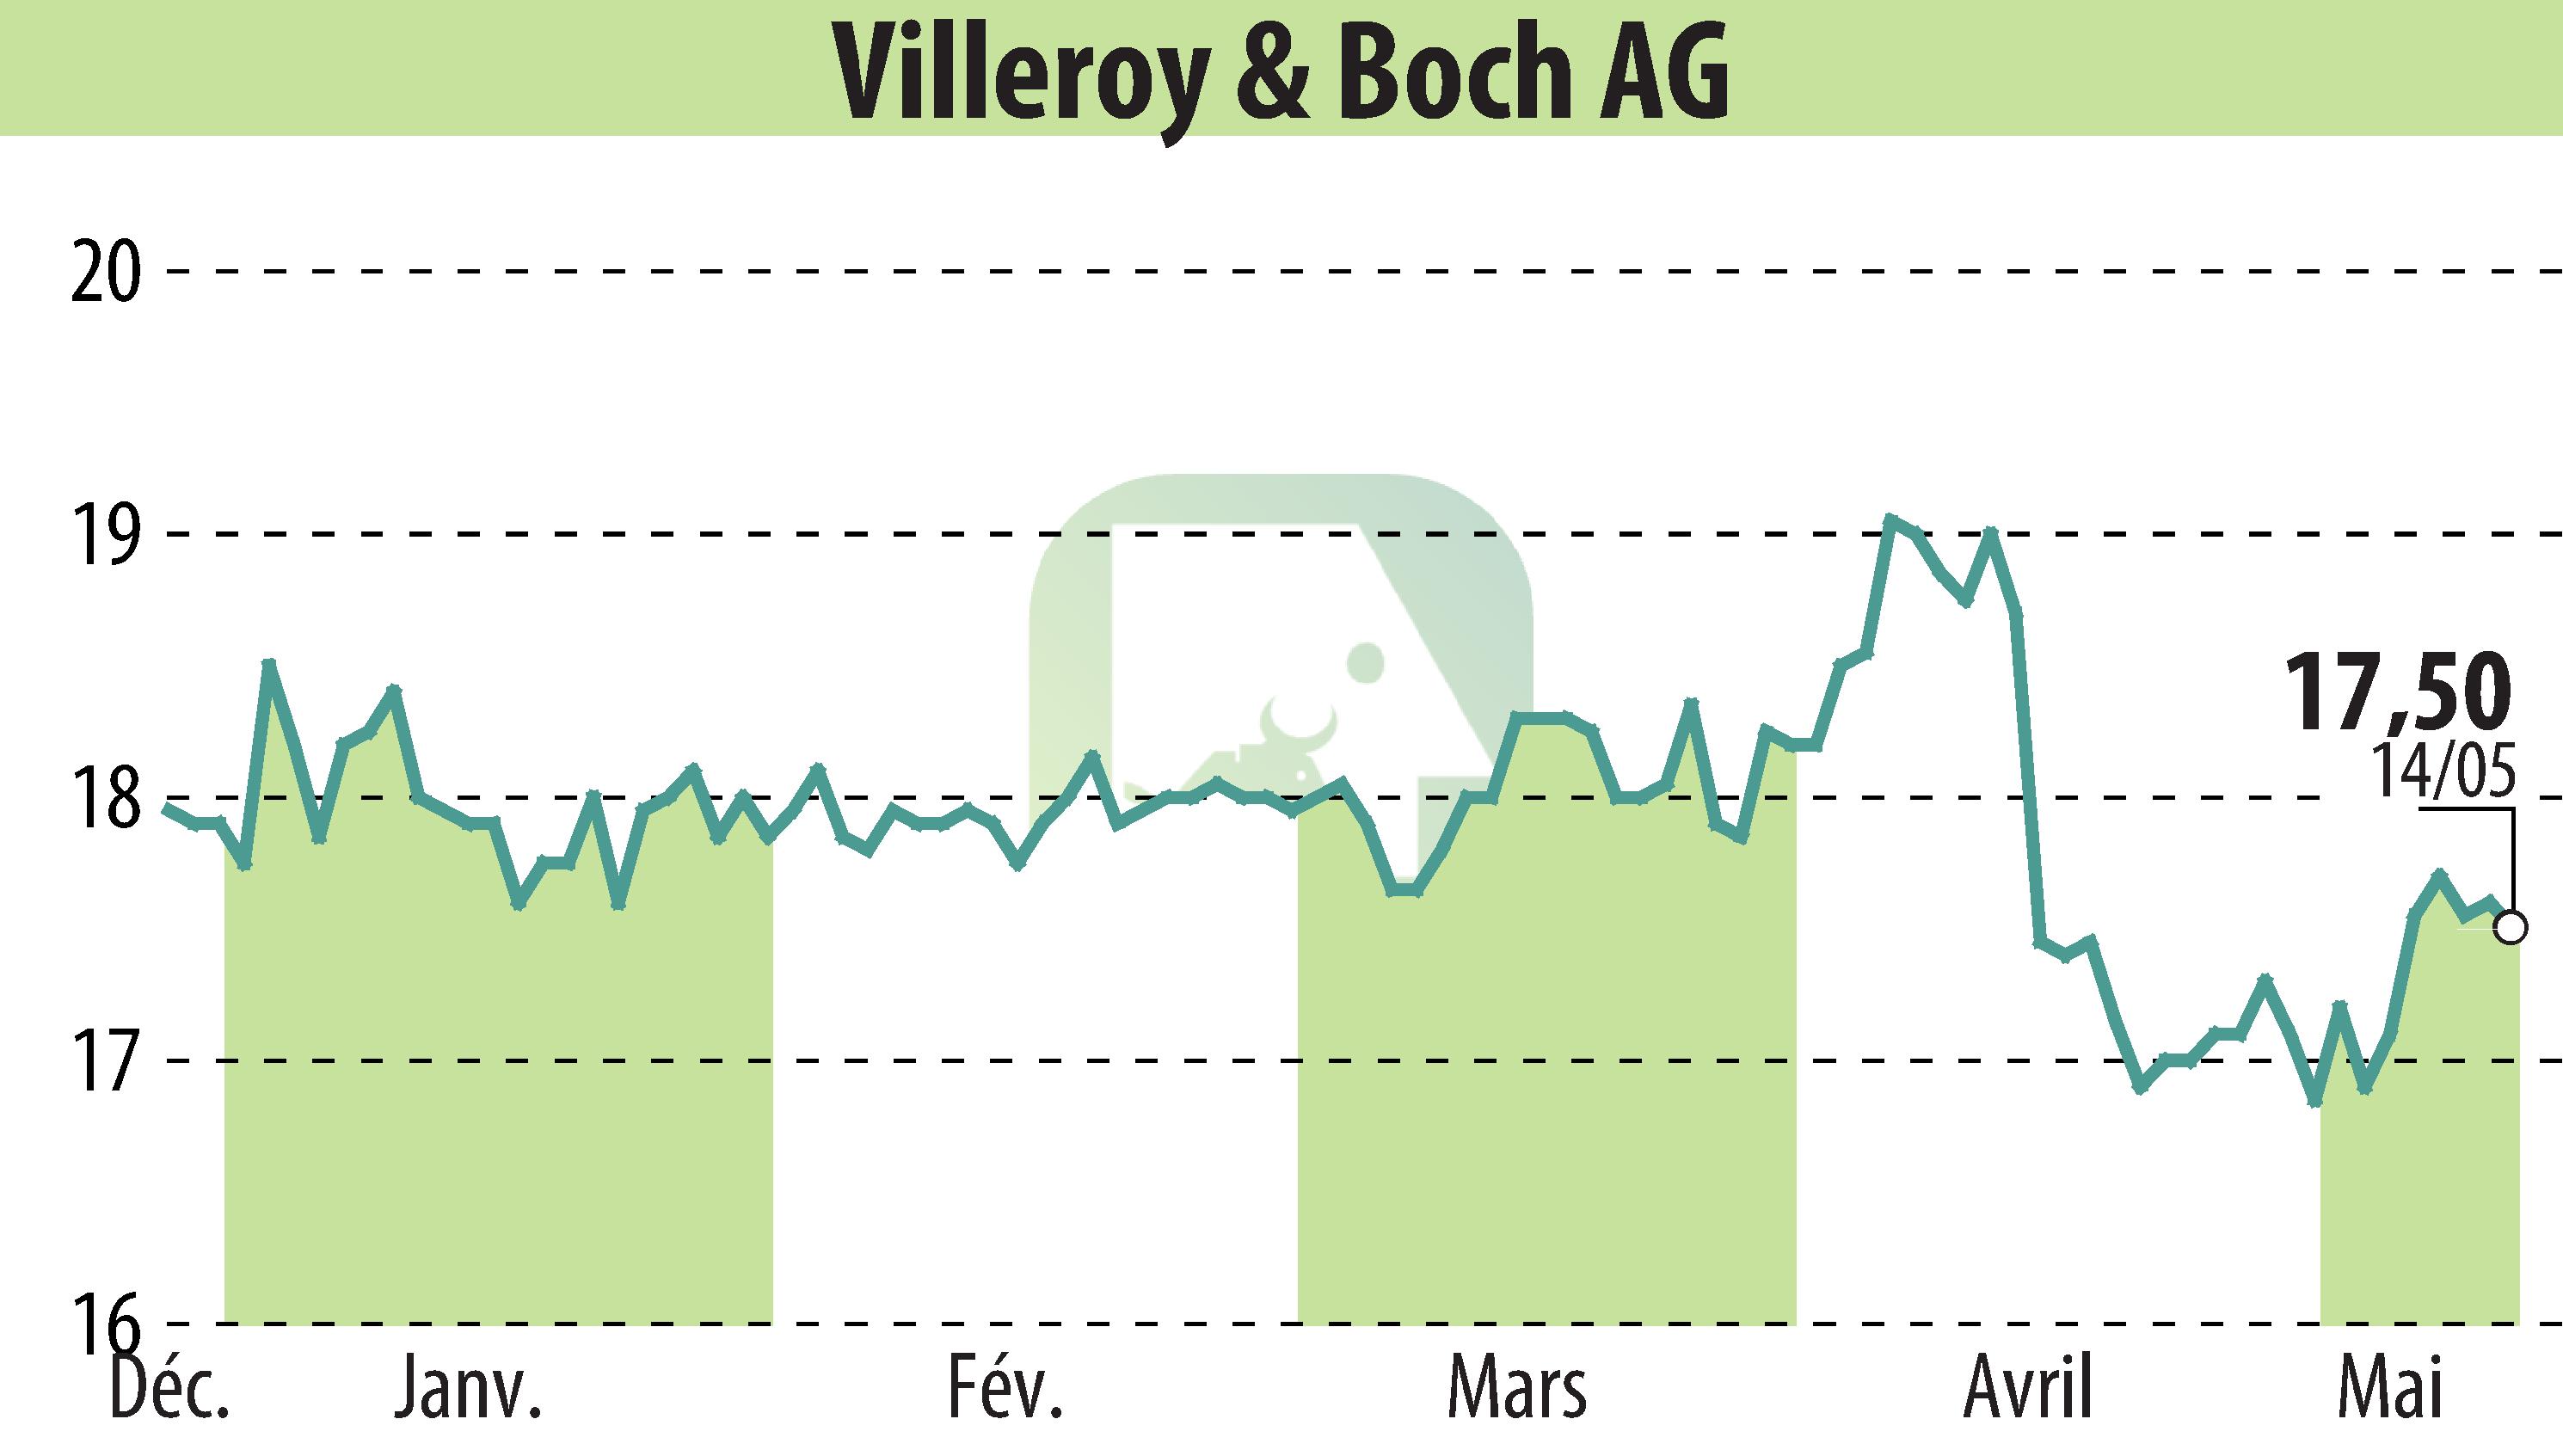 Stock price chart of Villeroy & Boch AG (EBR:VIB3) showing fluctuations.